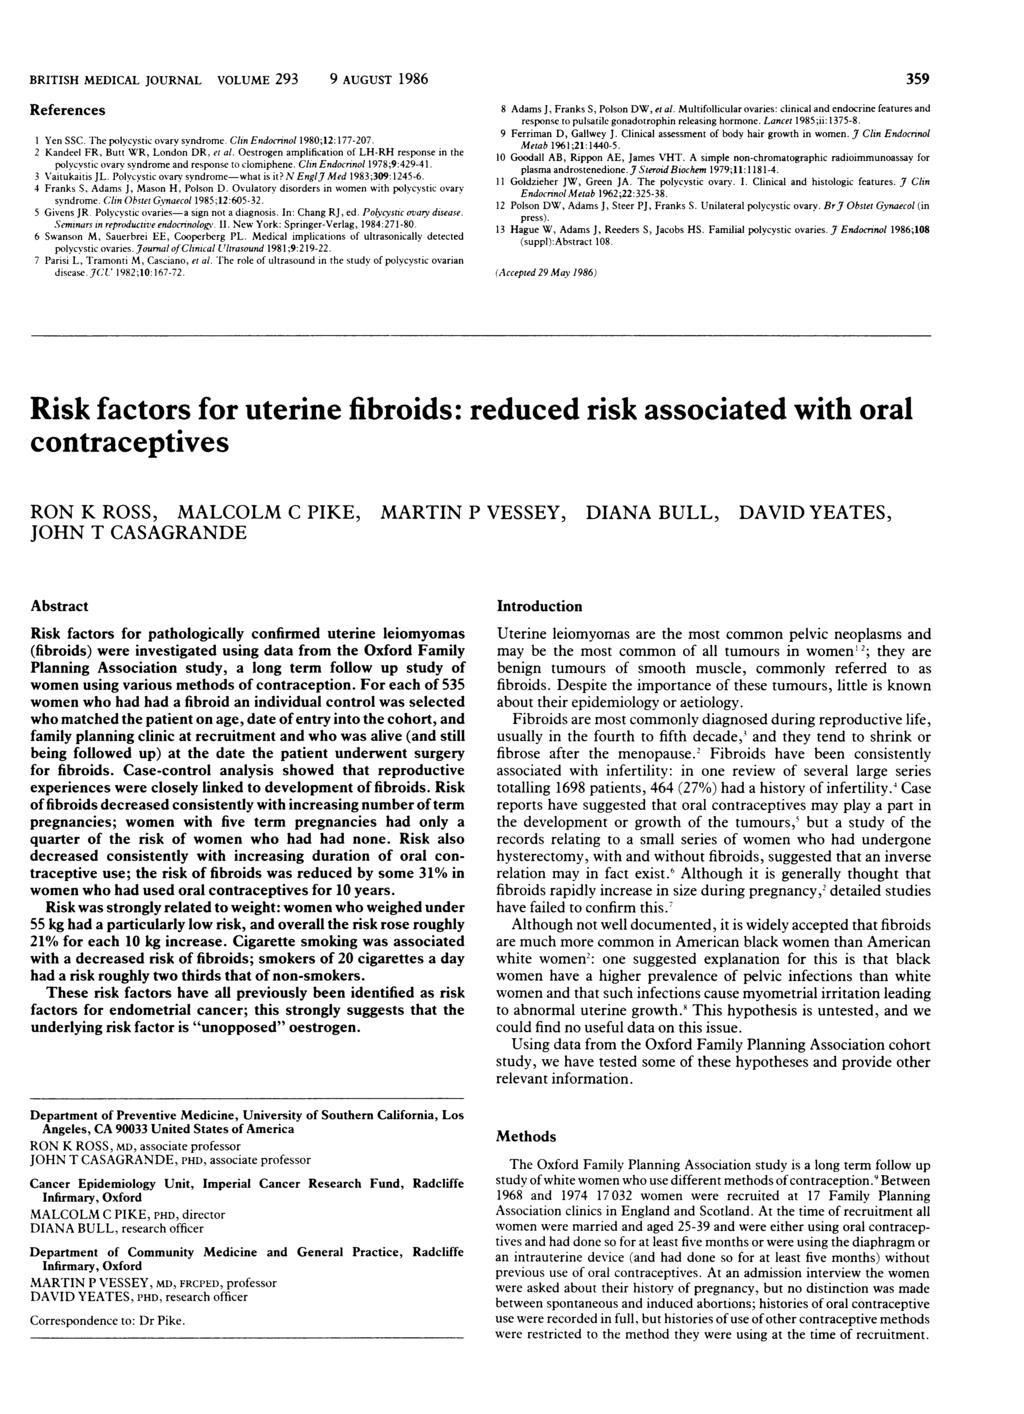 BRITISH MEDICAL JOURNAL VOLUME 293 9 AUGUST 1986 359 References I Yen SSC. The polycystic ovary syndrome. Clin Endocrinol 198;12: 177-27. 2 Kandeel FR, Butt WR, London DR, et al.